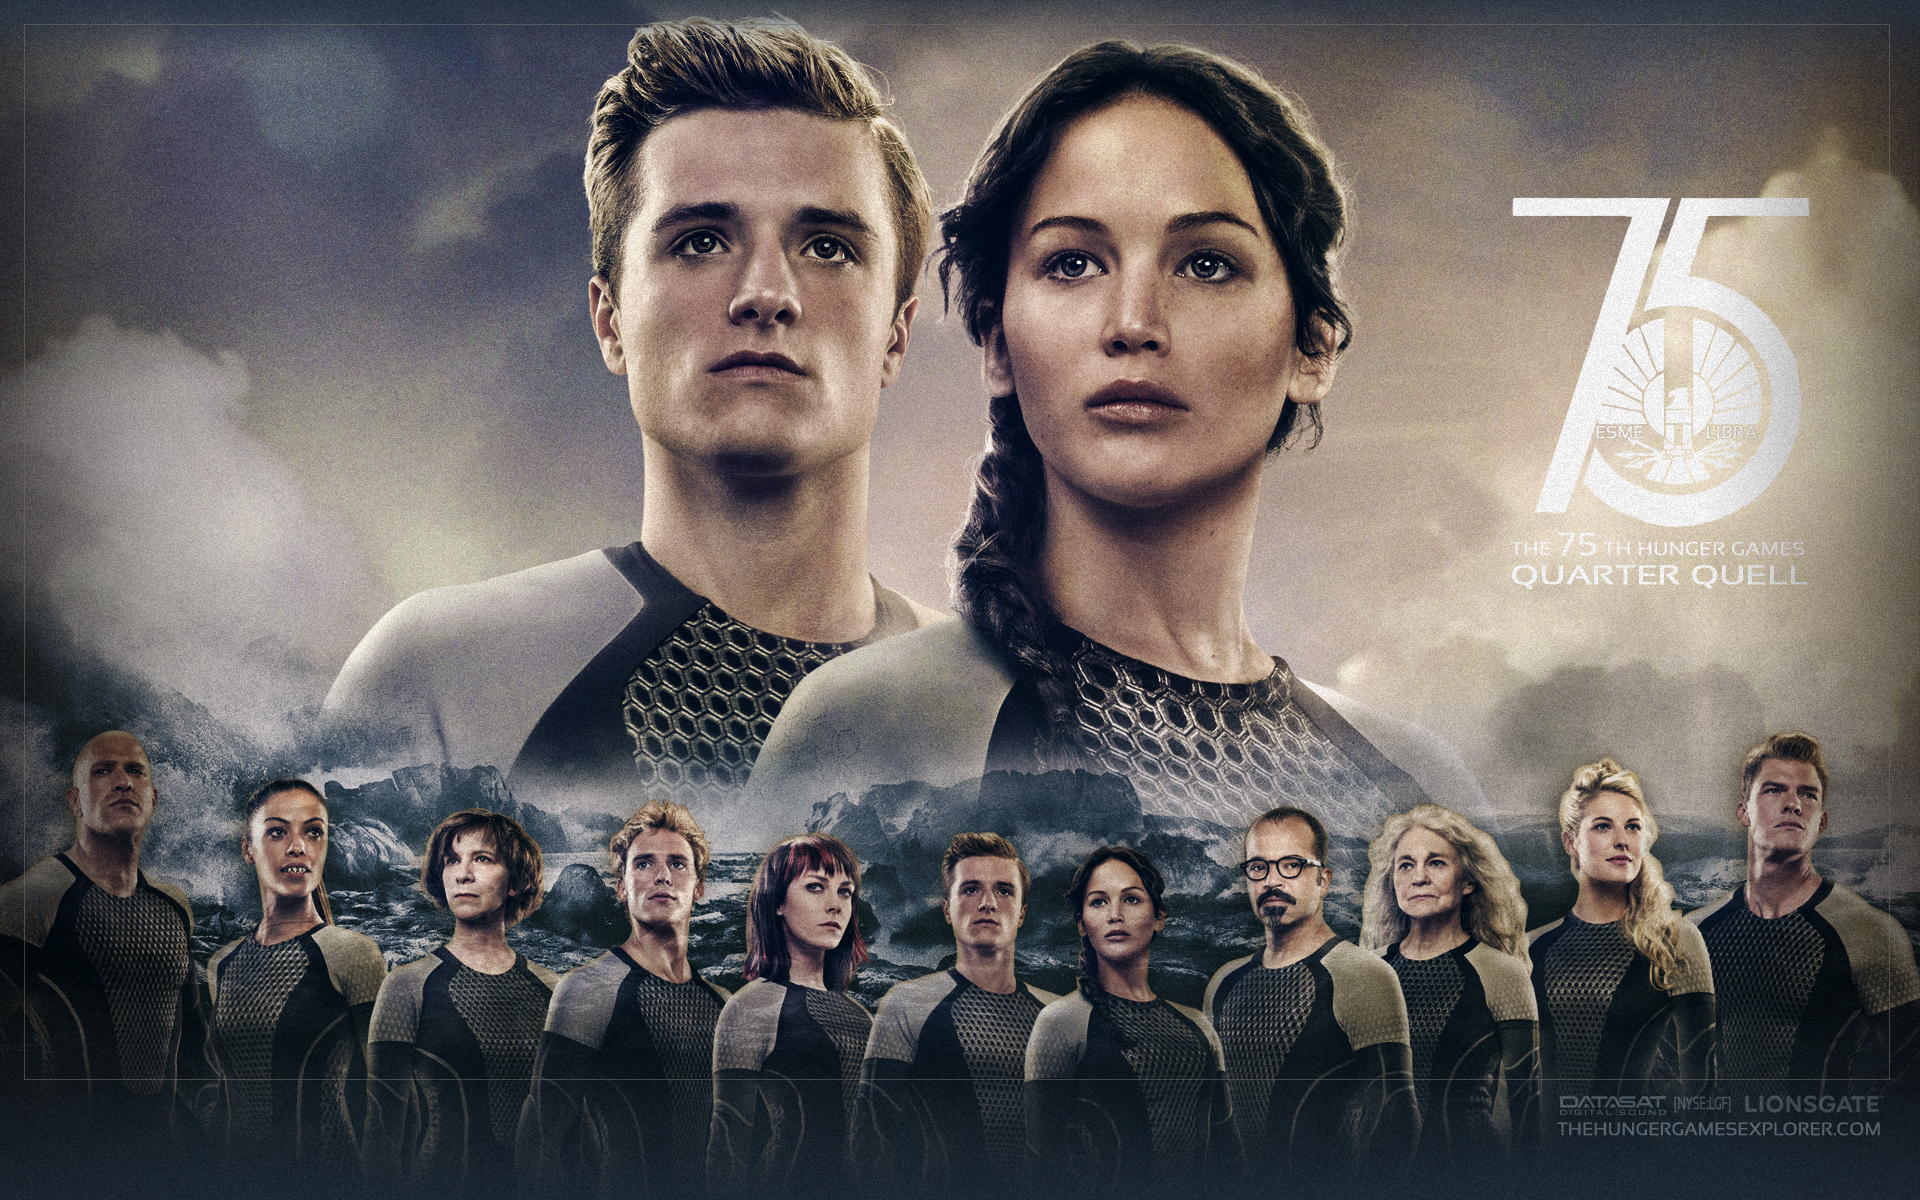 The Hunger Games - Catching Fire Wallpaper by esme libra on DeviantArt